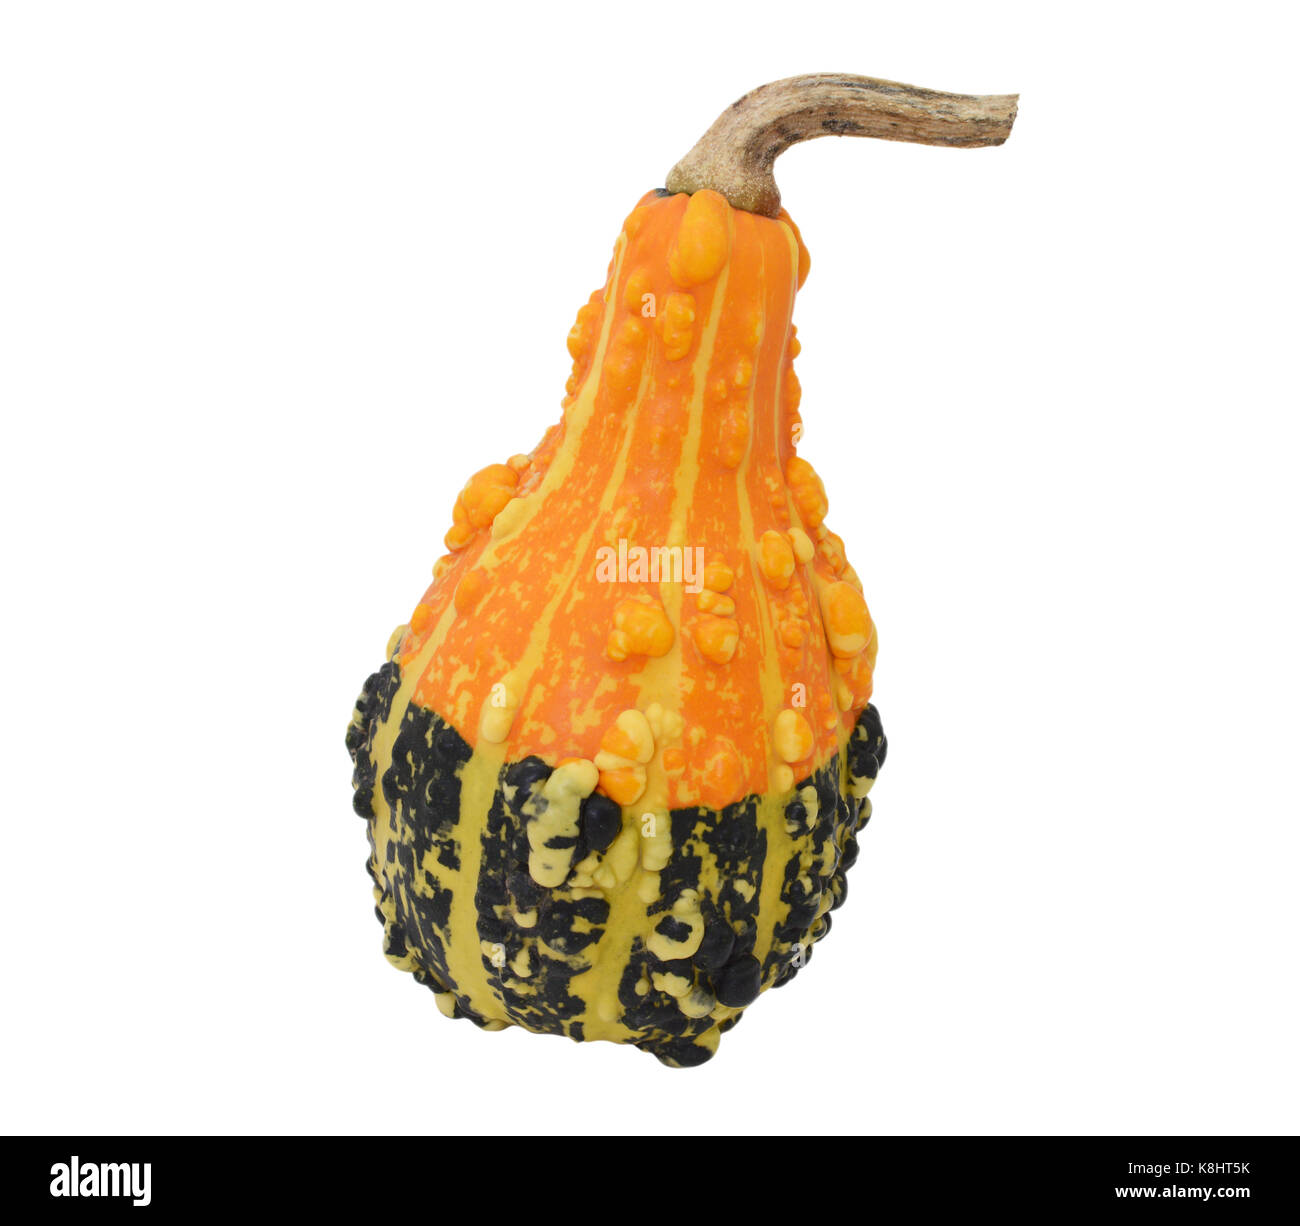 Pear-shaped orange and green ornamental gourd with large warty lumps and bold stripes, isolated on a white background Stock Photo